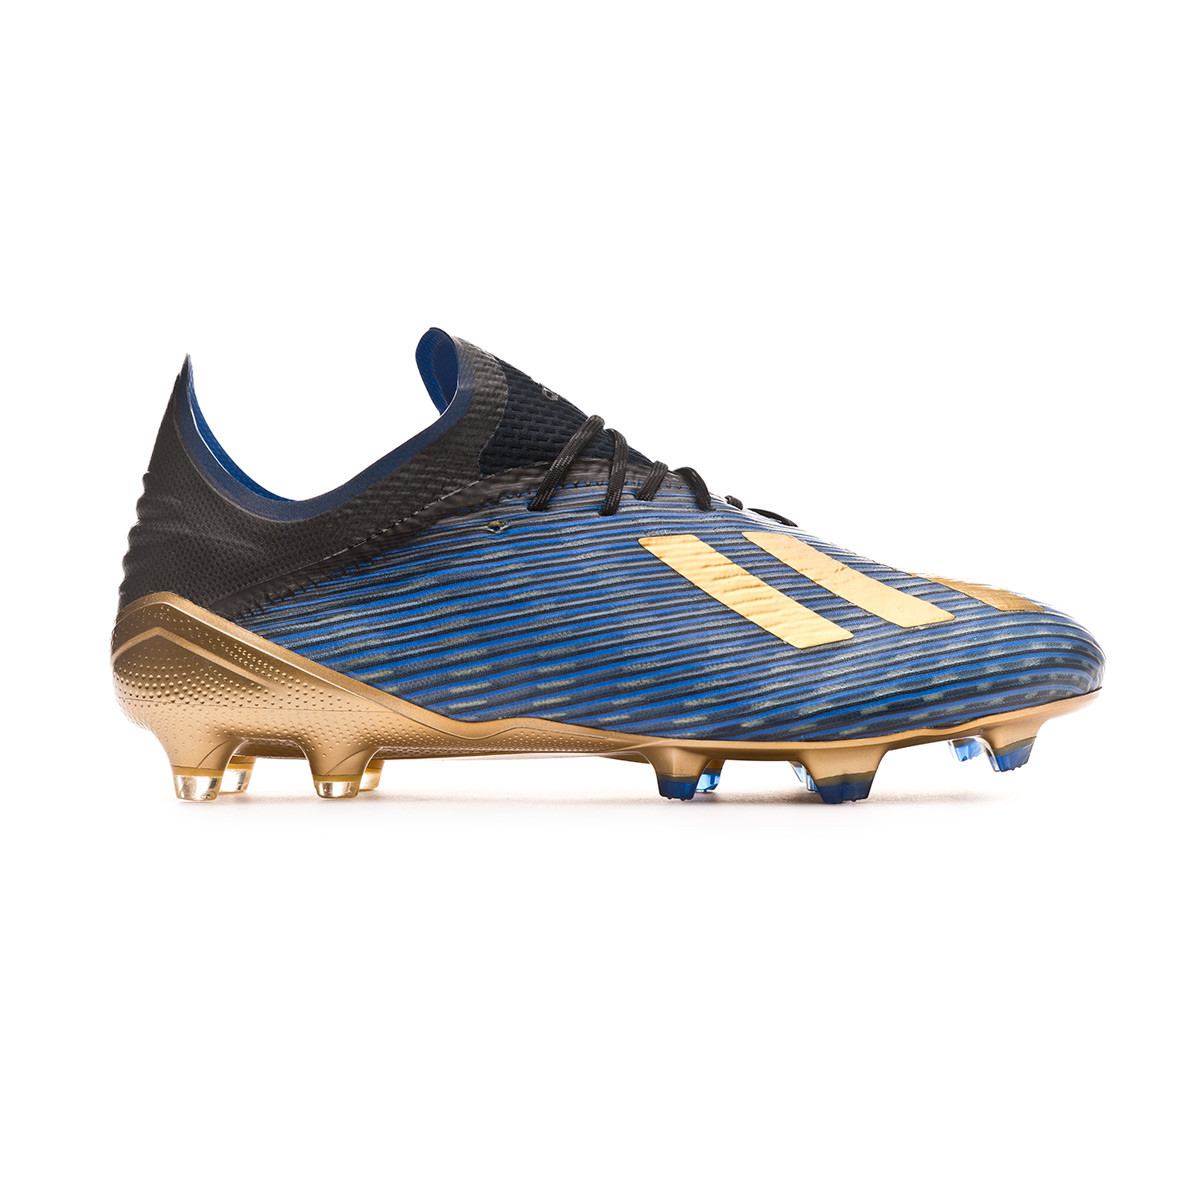 gold adidas boots